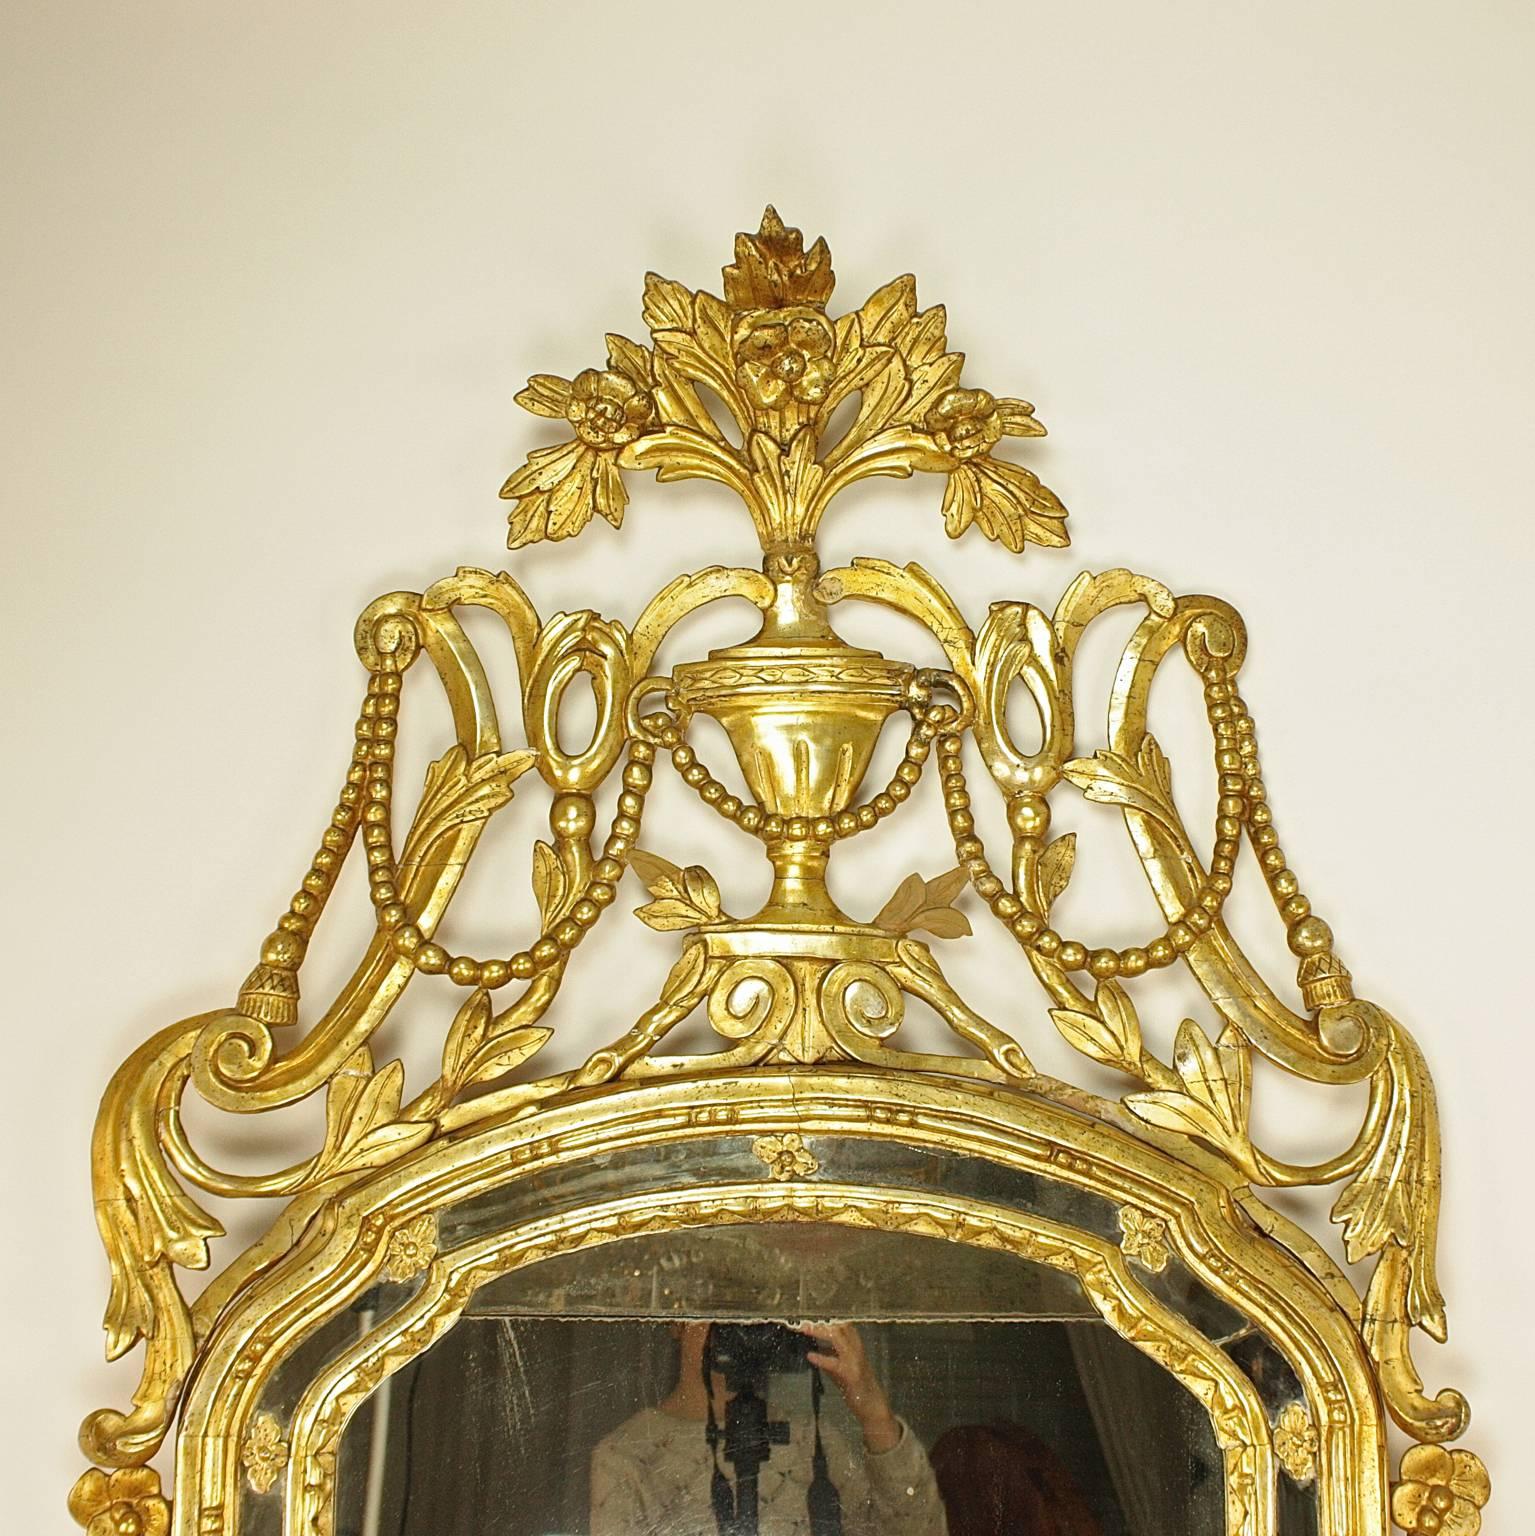 Large 18th Century Italian Rope & Tassels Decoration Carved Giltwood Mirror

A large and excellently carved and 18th century giltwood mirror with a shaped arched plate within a moulded frame and with a mirrored border. The elaborate pierced cresting